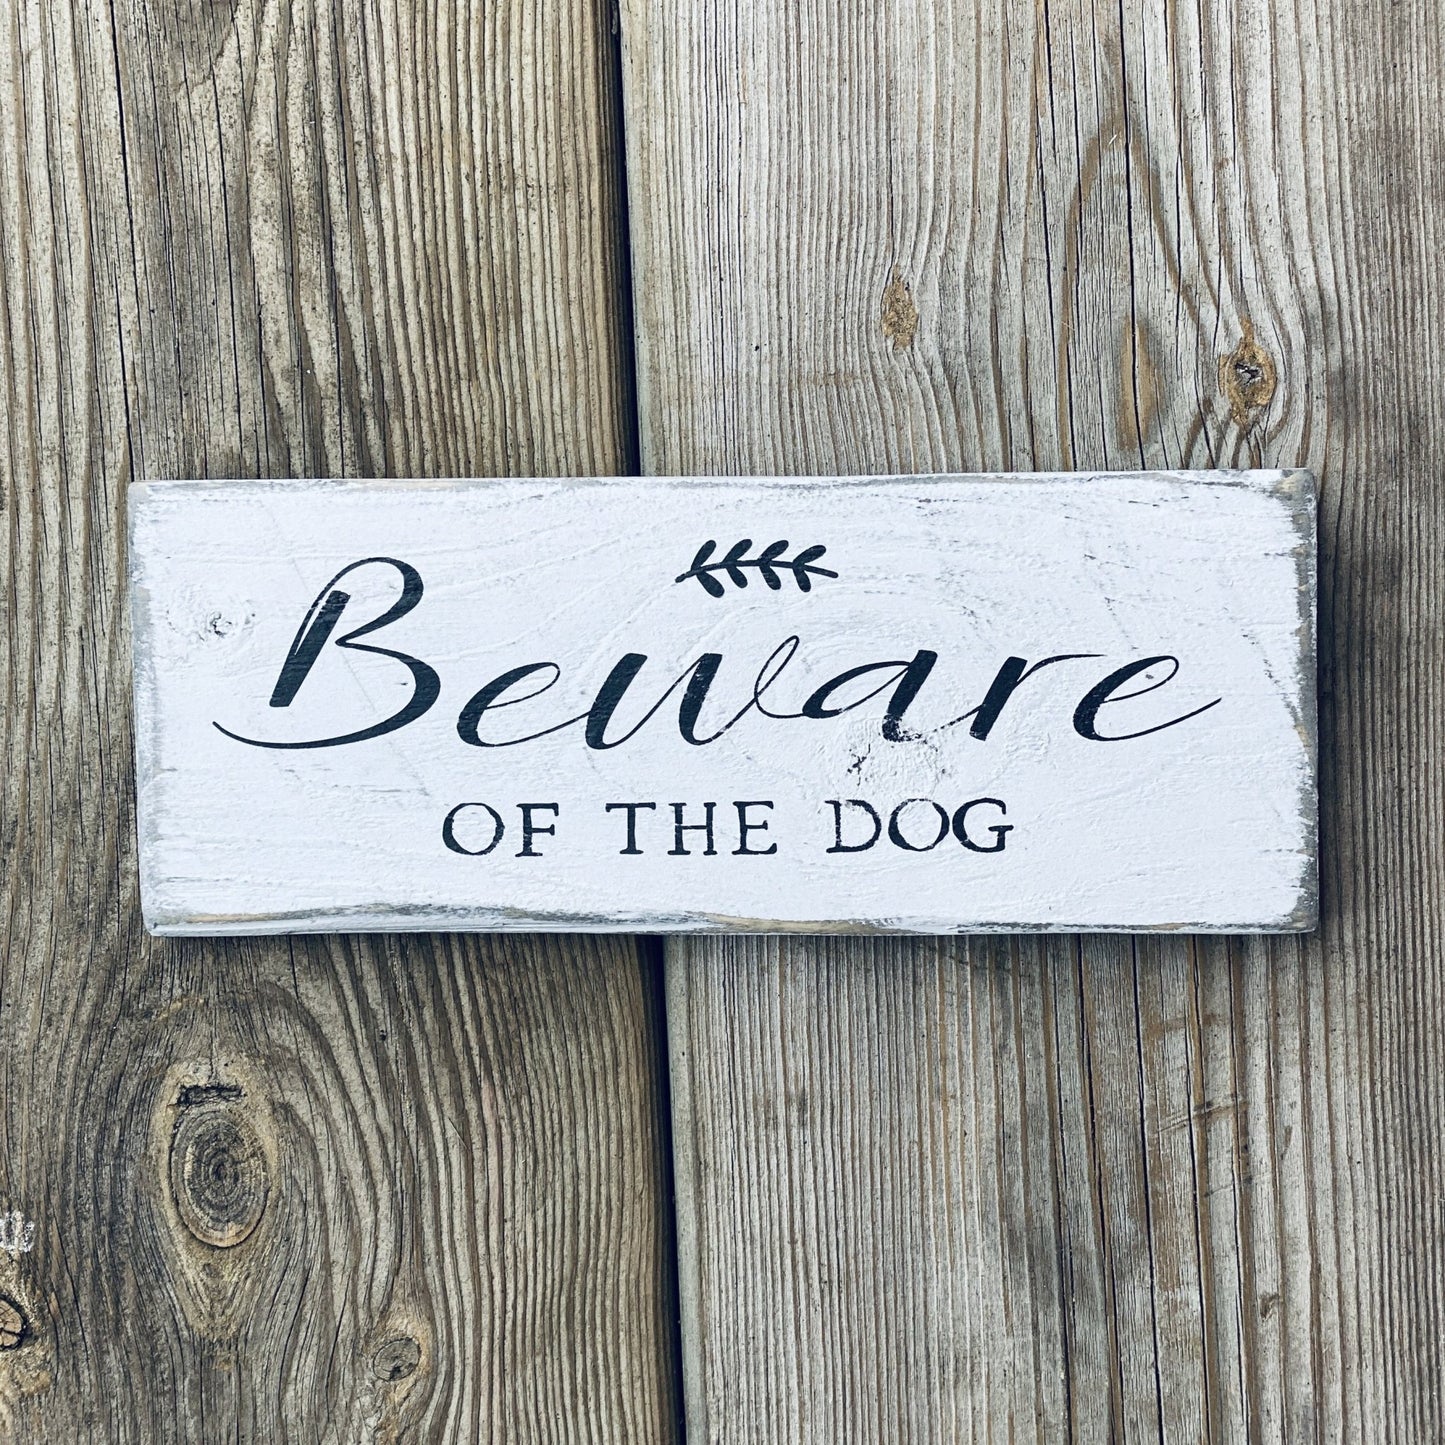 Beware of the Dog | Reclaimed Wood Sign - The Imperfect Wood Company - Hanging Wood Sign